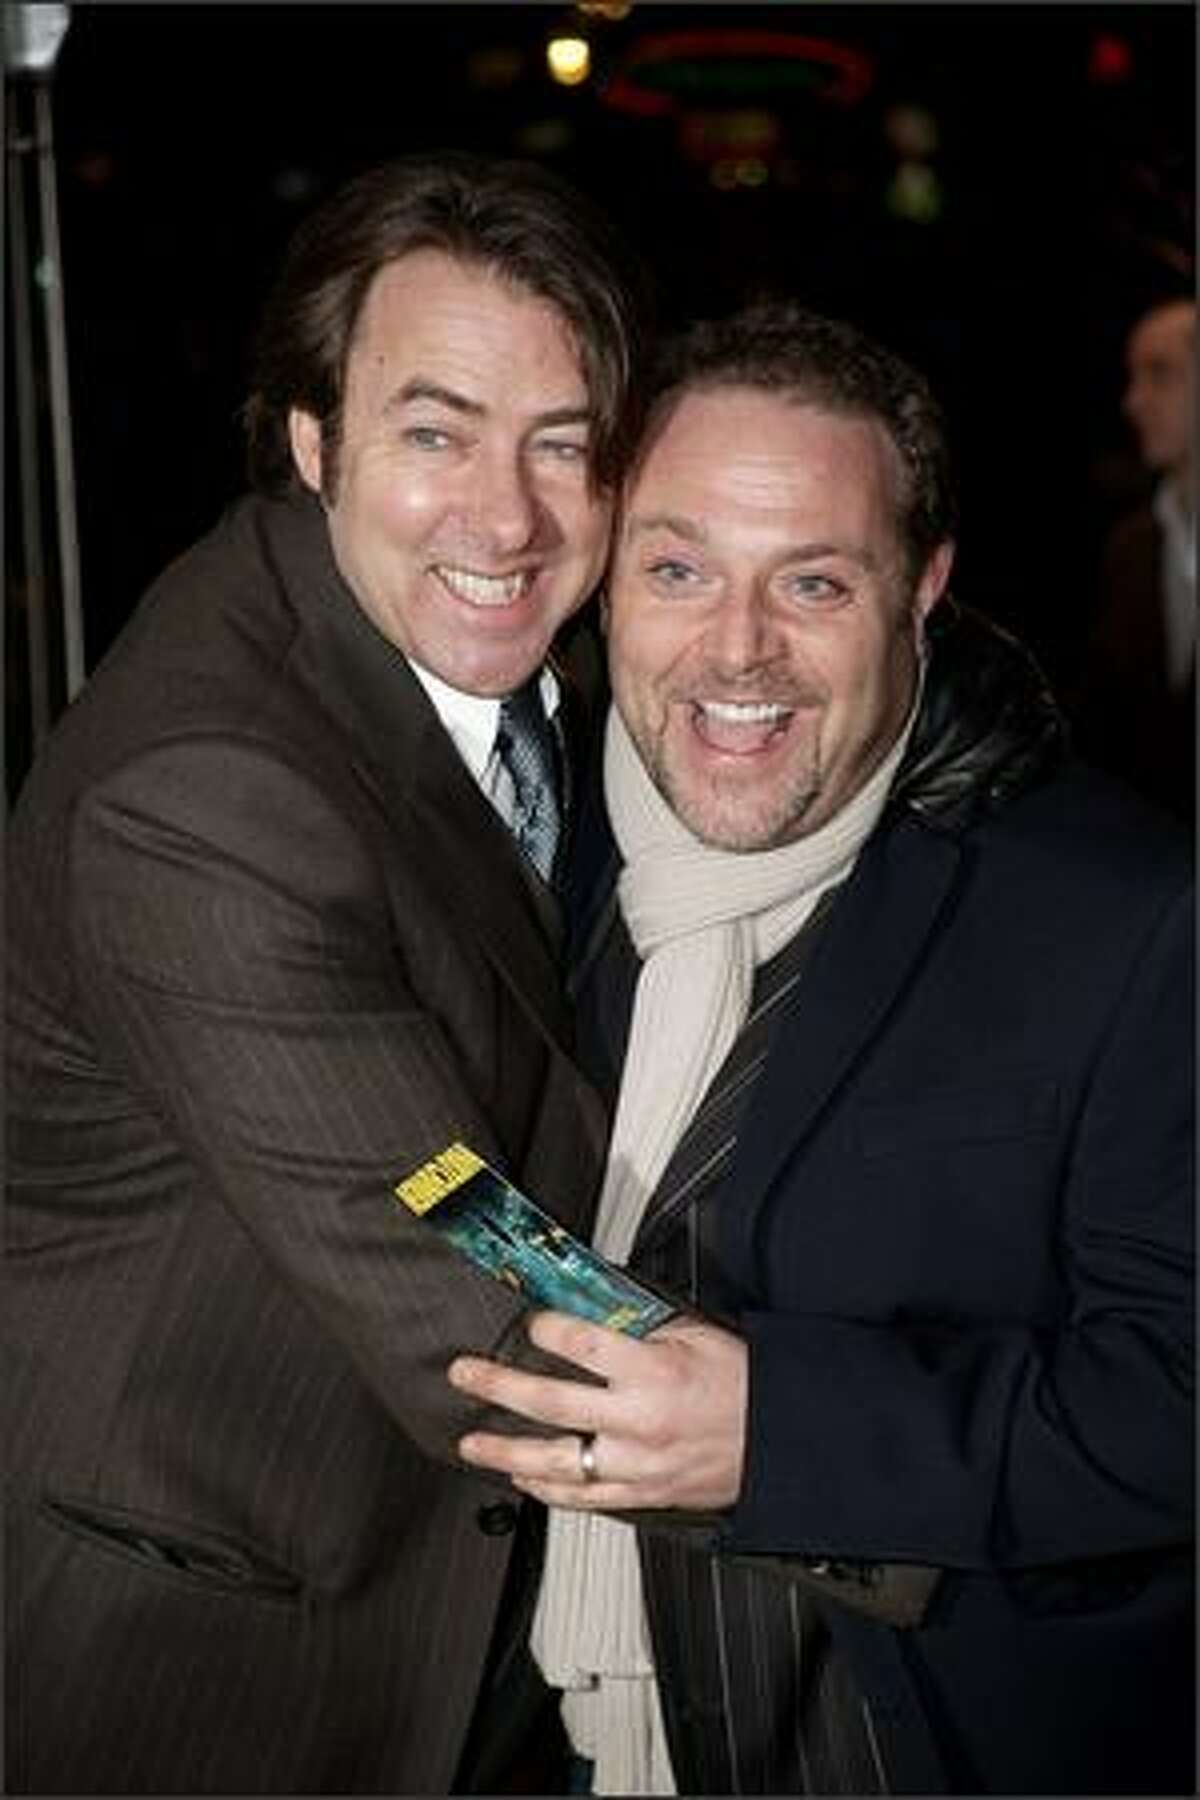 Jonathan Ross (L) and John Thompson attend the UK premiere of "Watchmen" at the Odeon, Leicester Square in London, England.